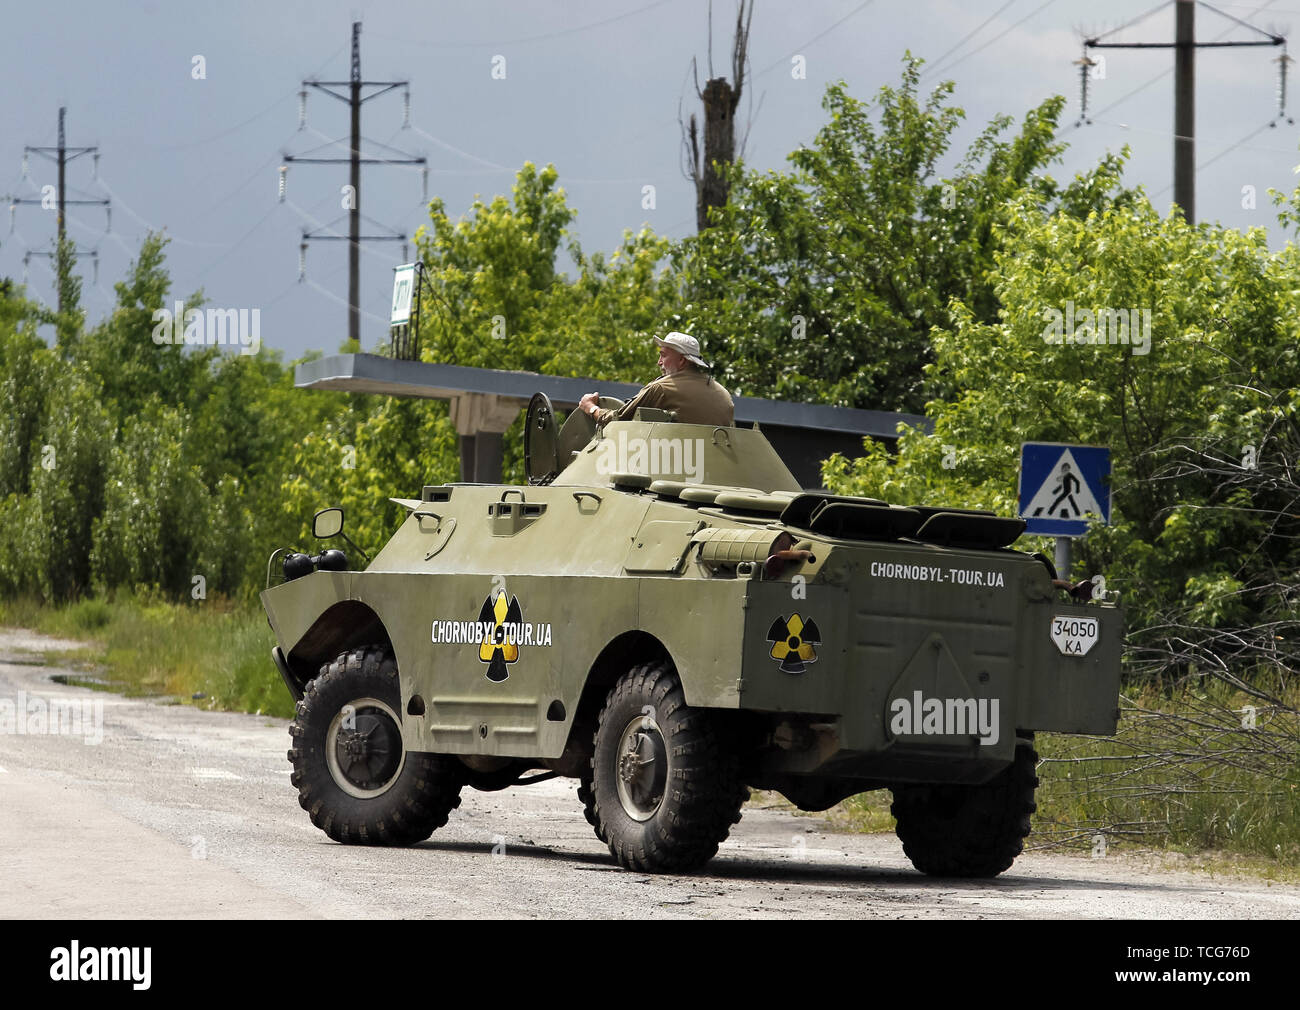 Kiev, Ukraine. 7th June, 2019. SERGII MIRNI, a radiation reconnaissance officer who participated in the compilation of the first maps of radiation pollution in 1986, rides on an armored personnel carrier at the Dityatki checkpoint in Chernobyl, Ukraine, on 7 June 2019. The success of a U.S. HBO's television miniseries 'Chernobyl' has renewed interest around the world on Ukraine's 1986 nuclear disaster. Tourism to Chernobyl has spiked 40% following the debut of the HBO series in May, tour agencies reported. Credit: ZUMA Press, Inc./Alamy Live News Stock Photo